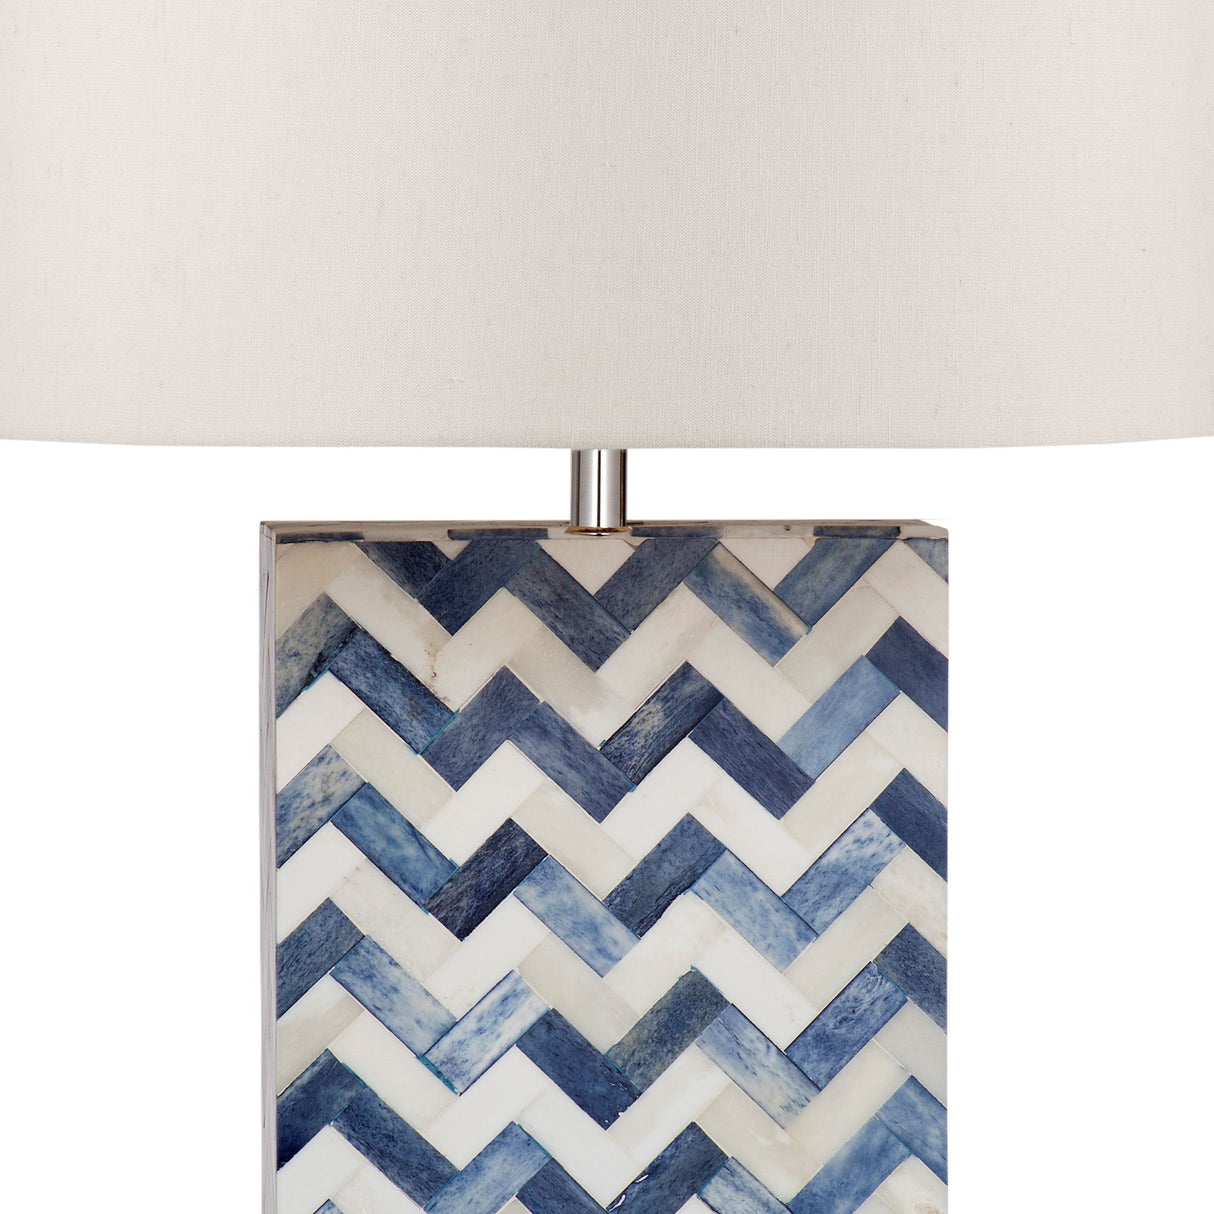 Dunmore - Table Lamp - Blue